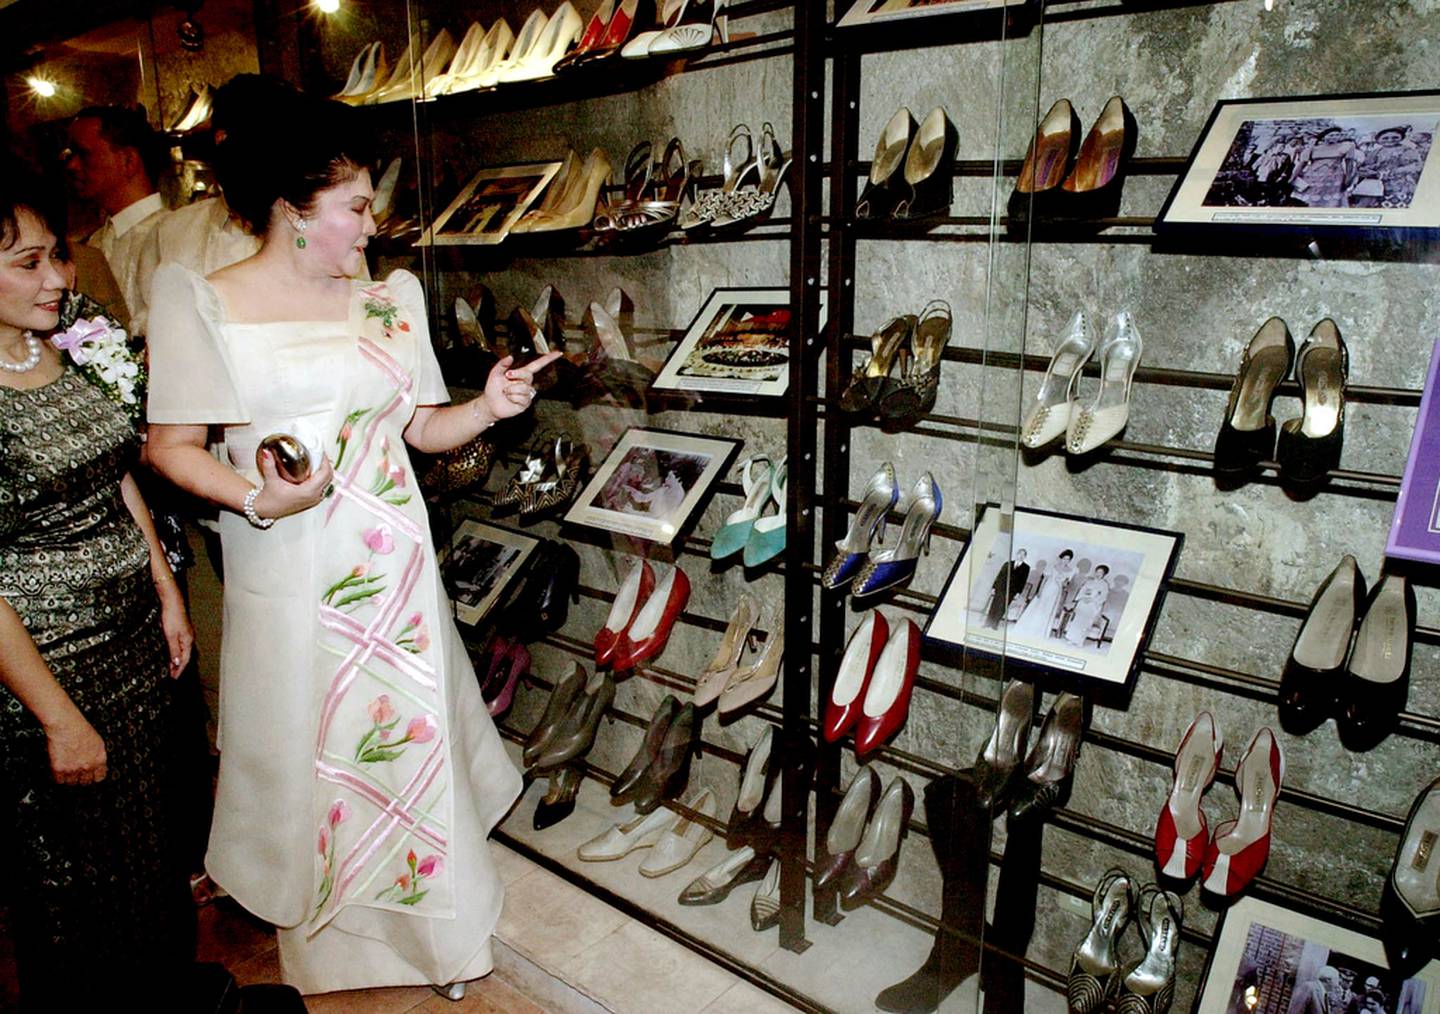 Imelda Marcos, the former first lady of the Philippines, looks at her famous shoe collection after the opening of the Marikina Shoe Museum in 2001. Joel Nito / AFP Photo